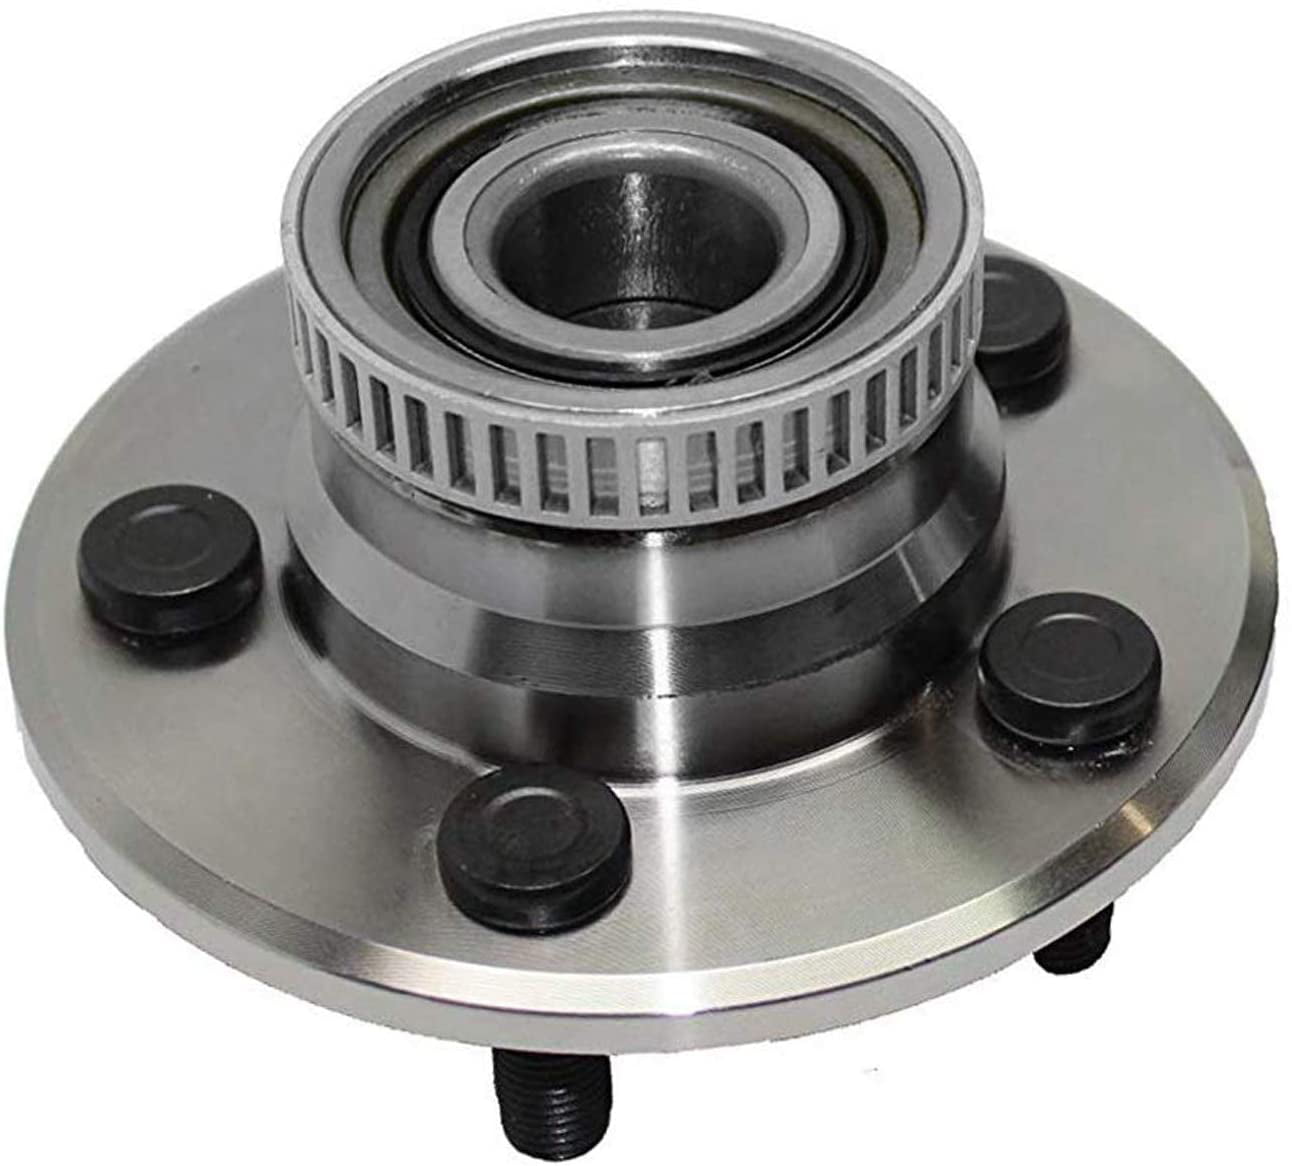 Front Wheel Hub Repair Kit Bearing Assembly Fits 95-99 Dodge Plymouth Neon